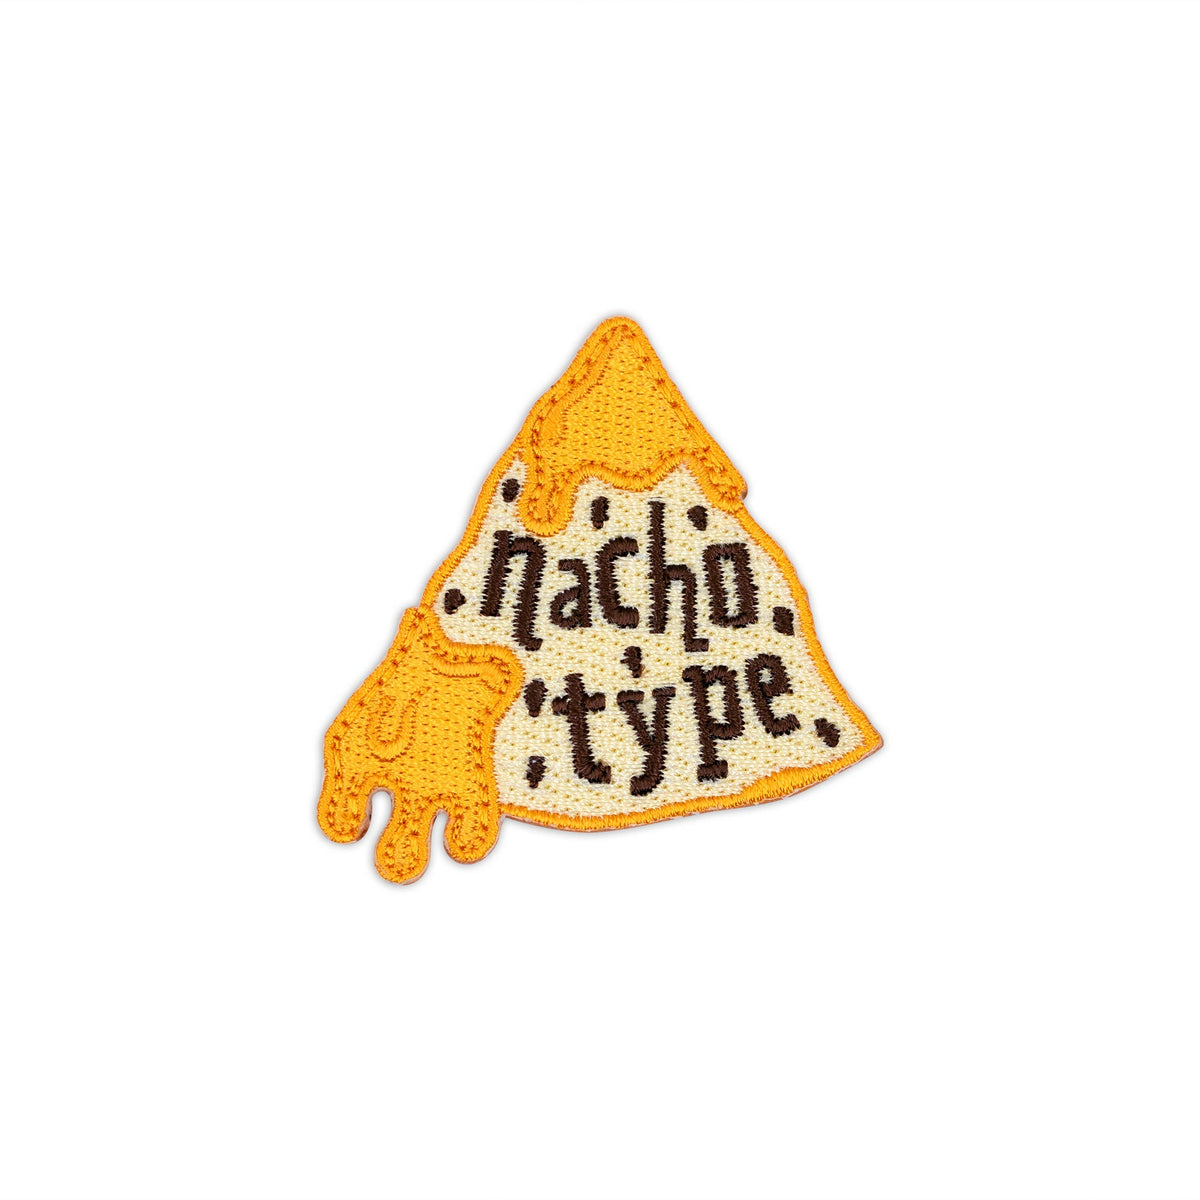 Nacho Type Tortilla Chip embroidered iron-on patch